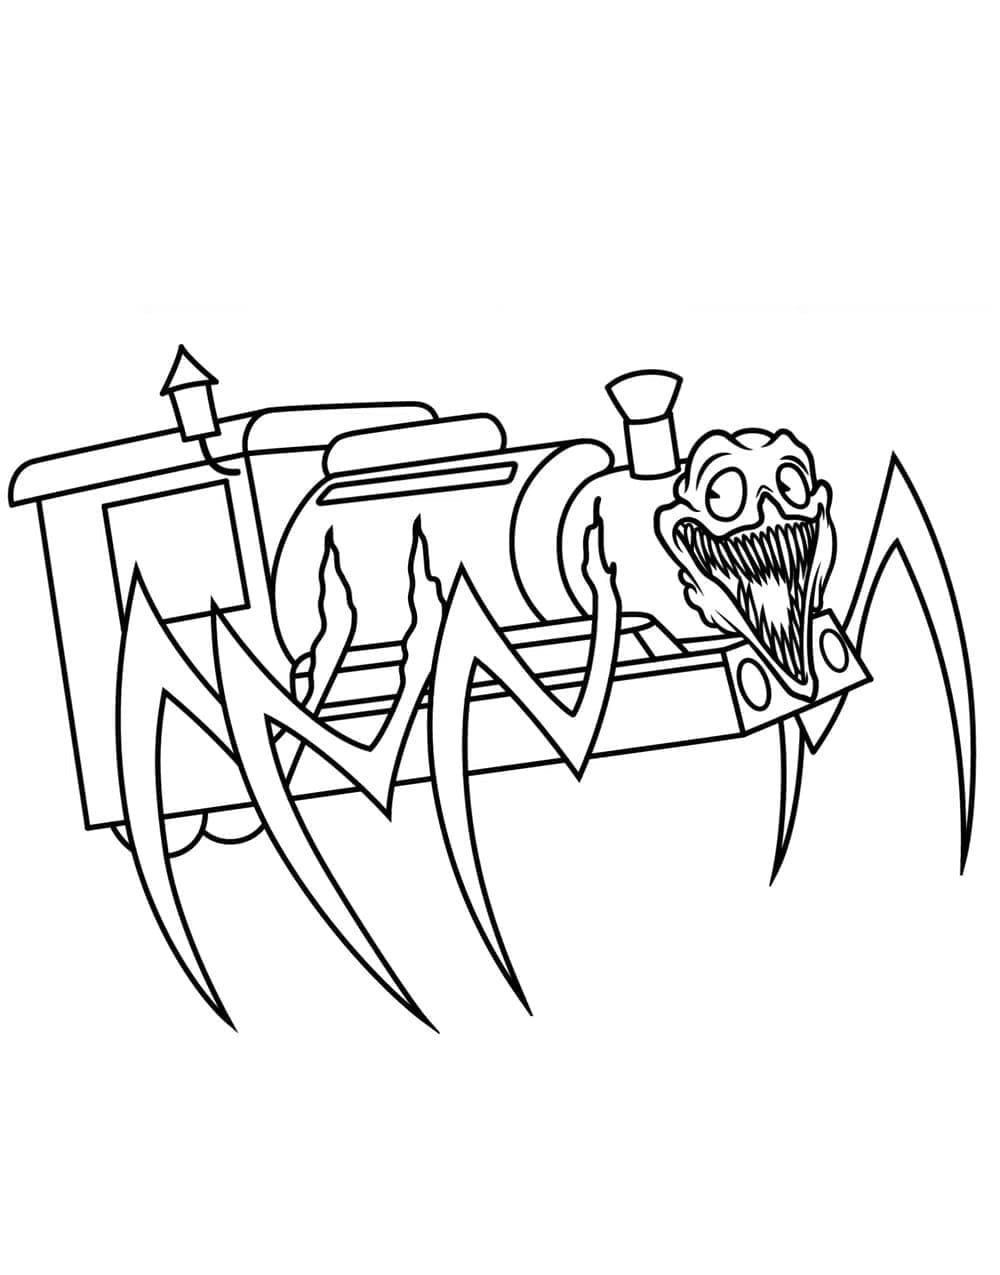 Cho-Choo Charles Spider Train coloring page - Download, Print or Color ...